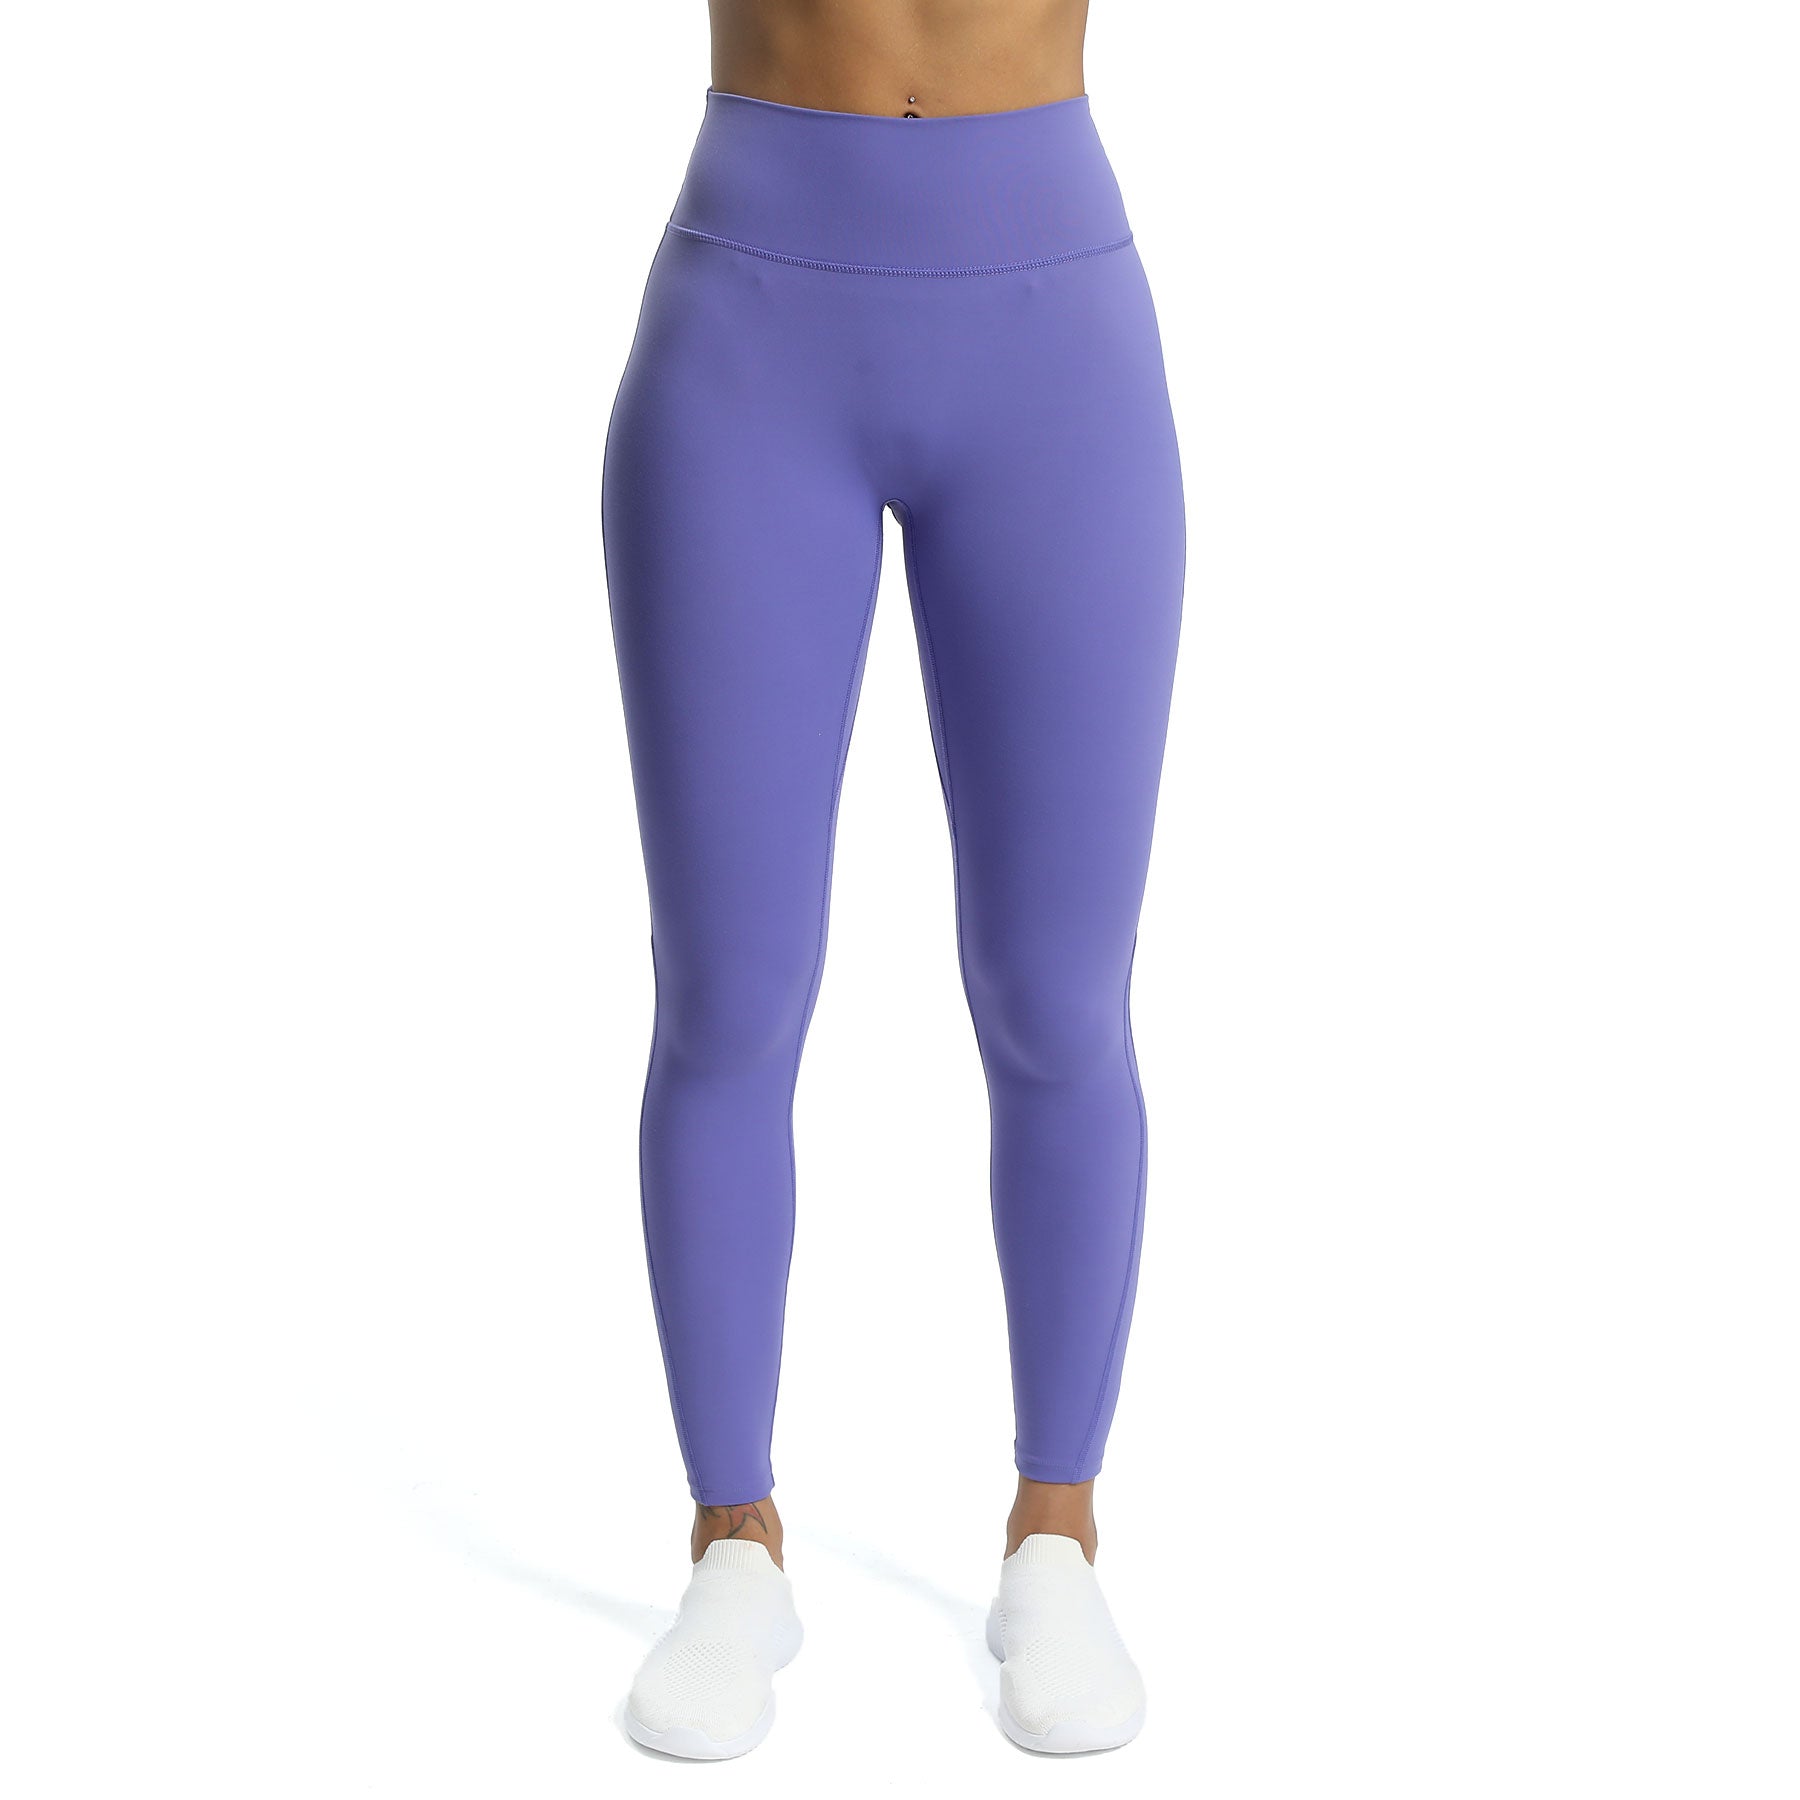 Aoxjox High Waisted Workout Leggings for Women Compression Tummy